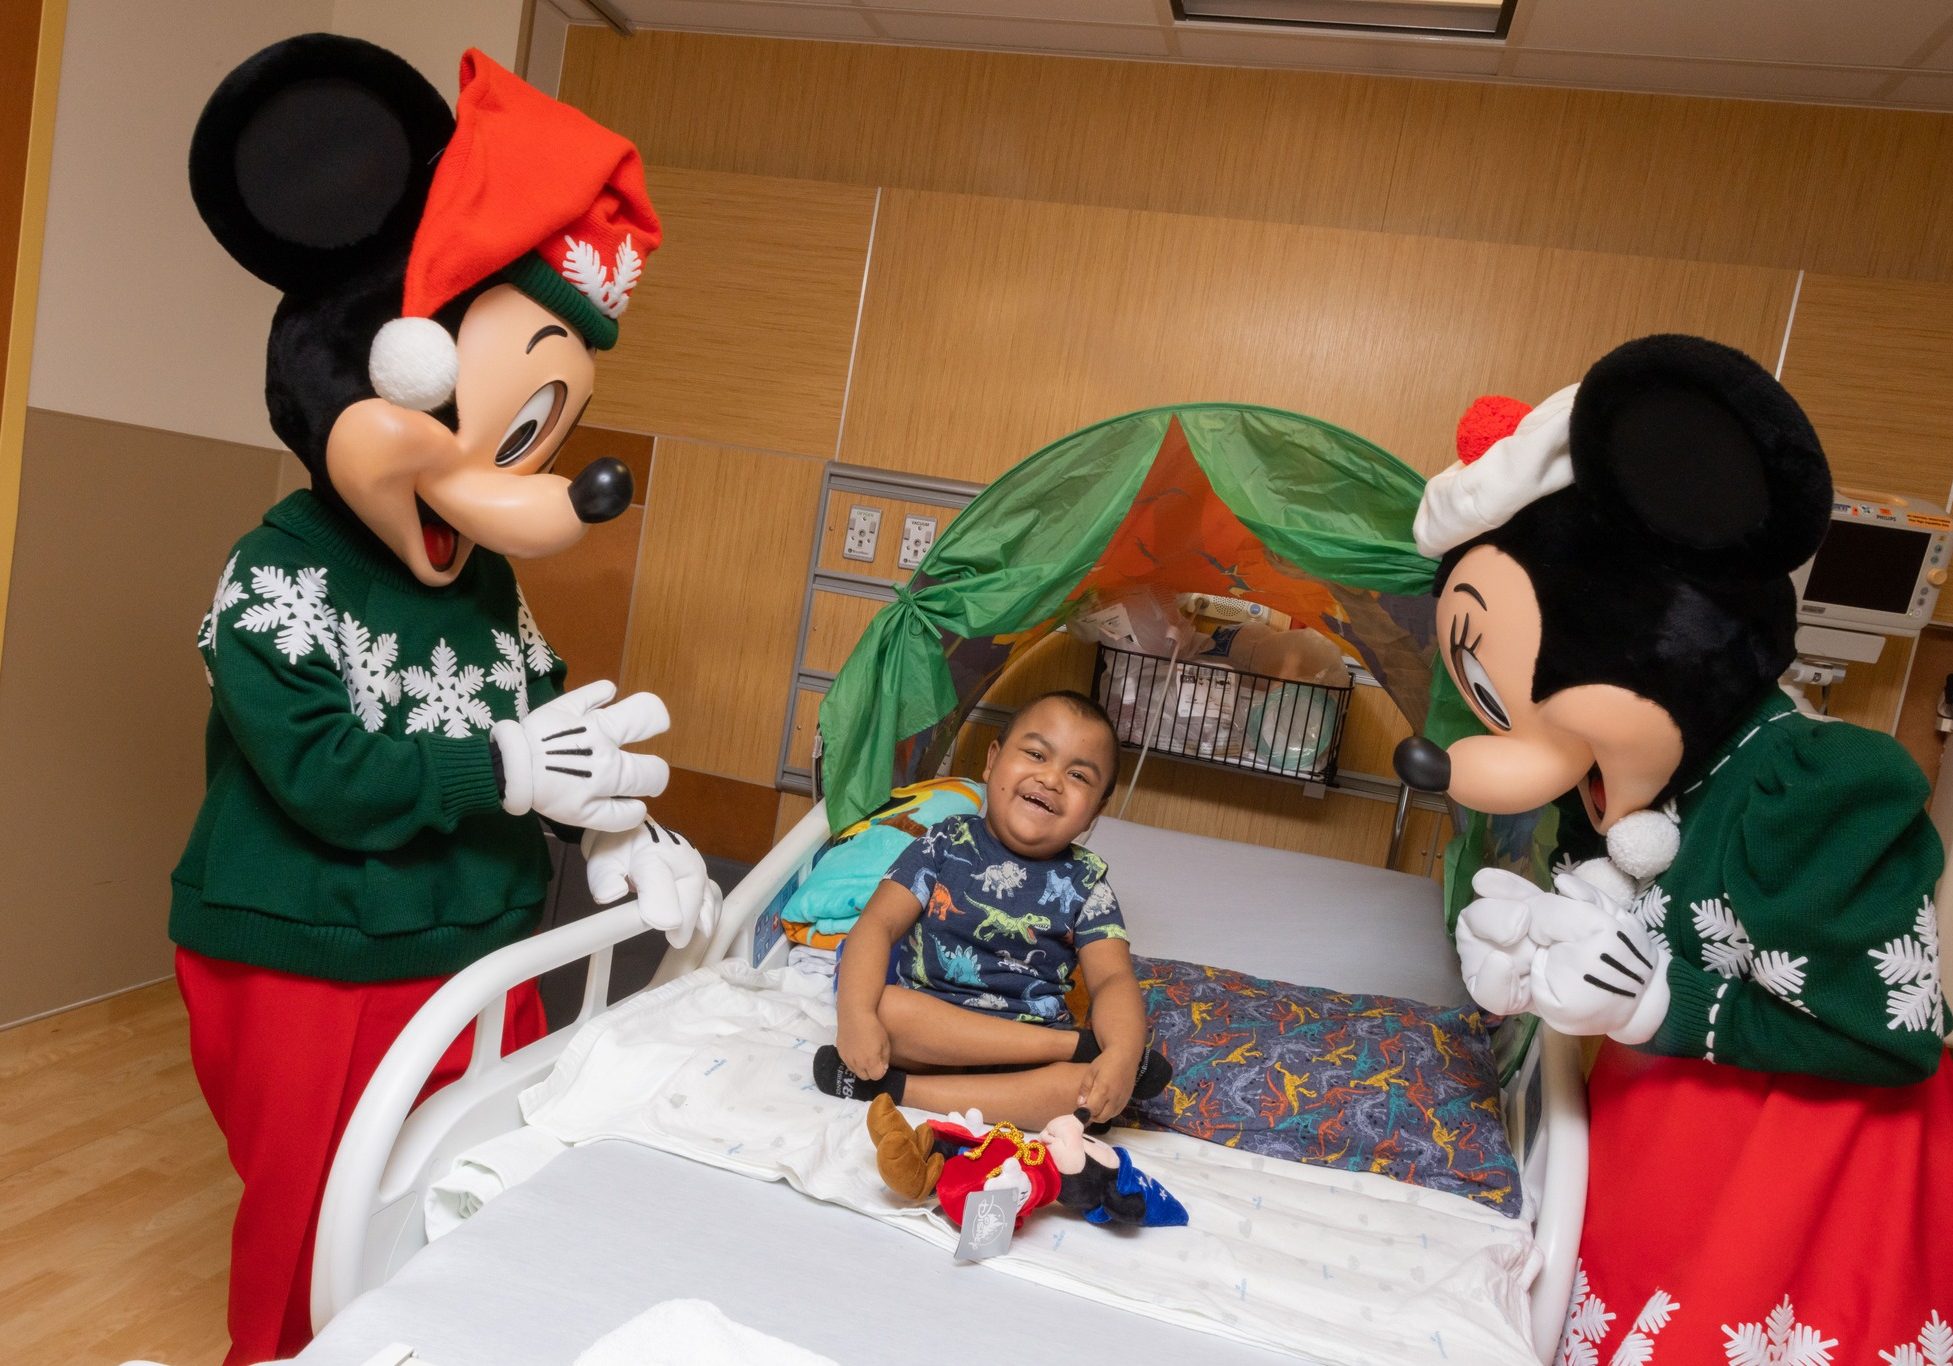 Mickey and Minnie Mouse stand over a smiling child in a hospital bed